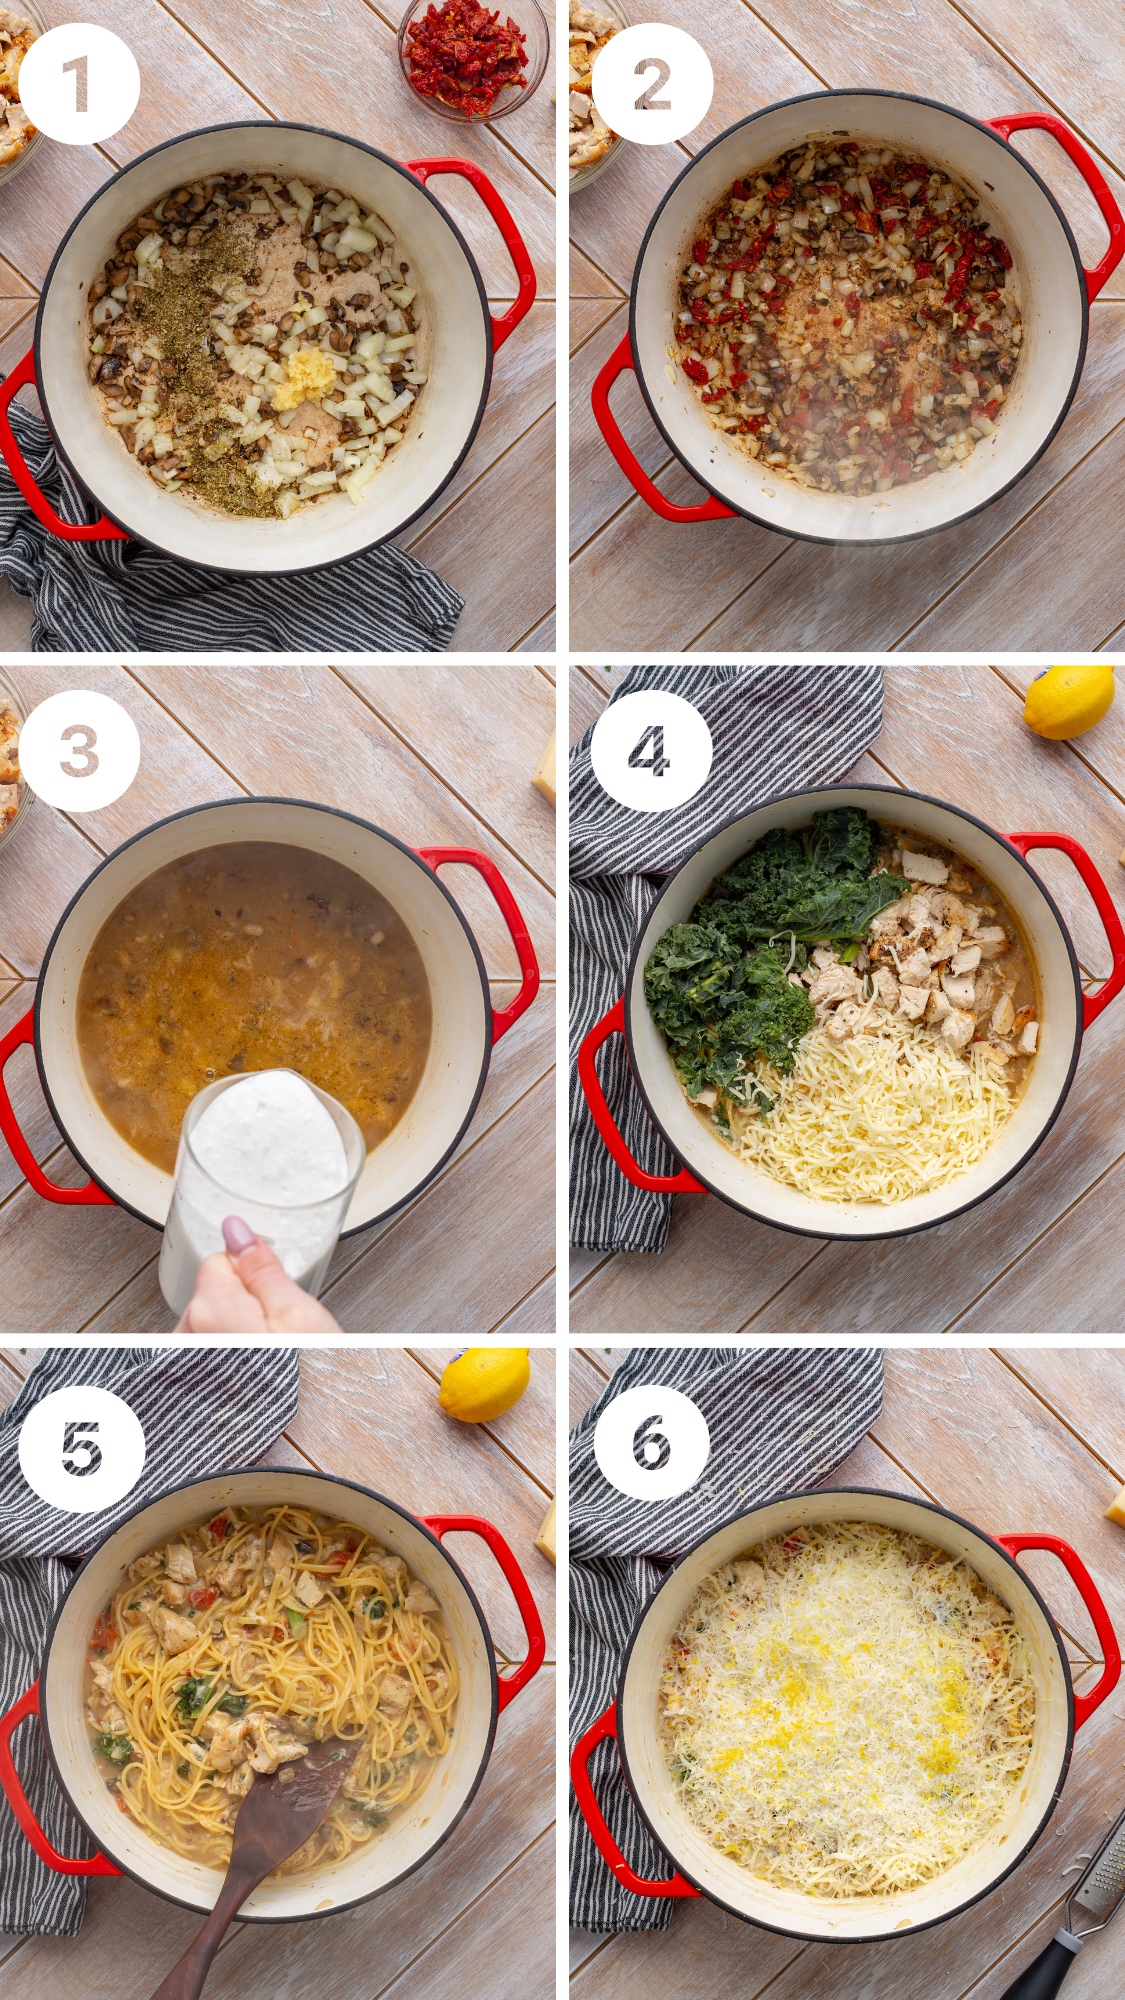 A six-step process of cooking a creamy pasta dish in a red pot: sautéing onions, adding broth and spices, adding cream, mixing in greens and chicken, stirring pasta, and the finished creamy pasta.